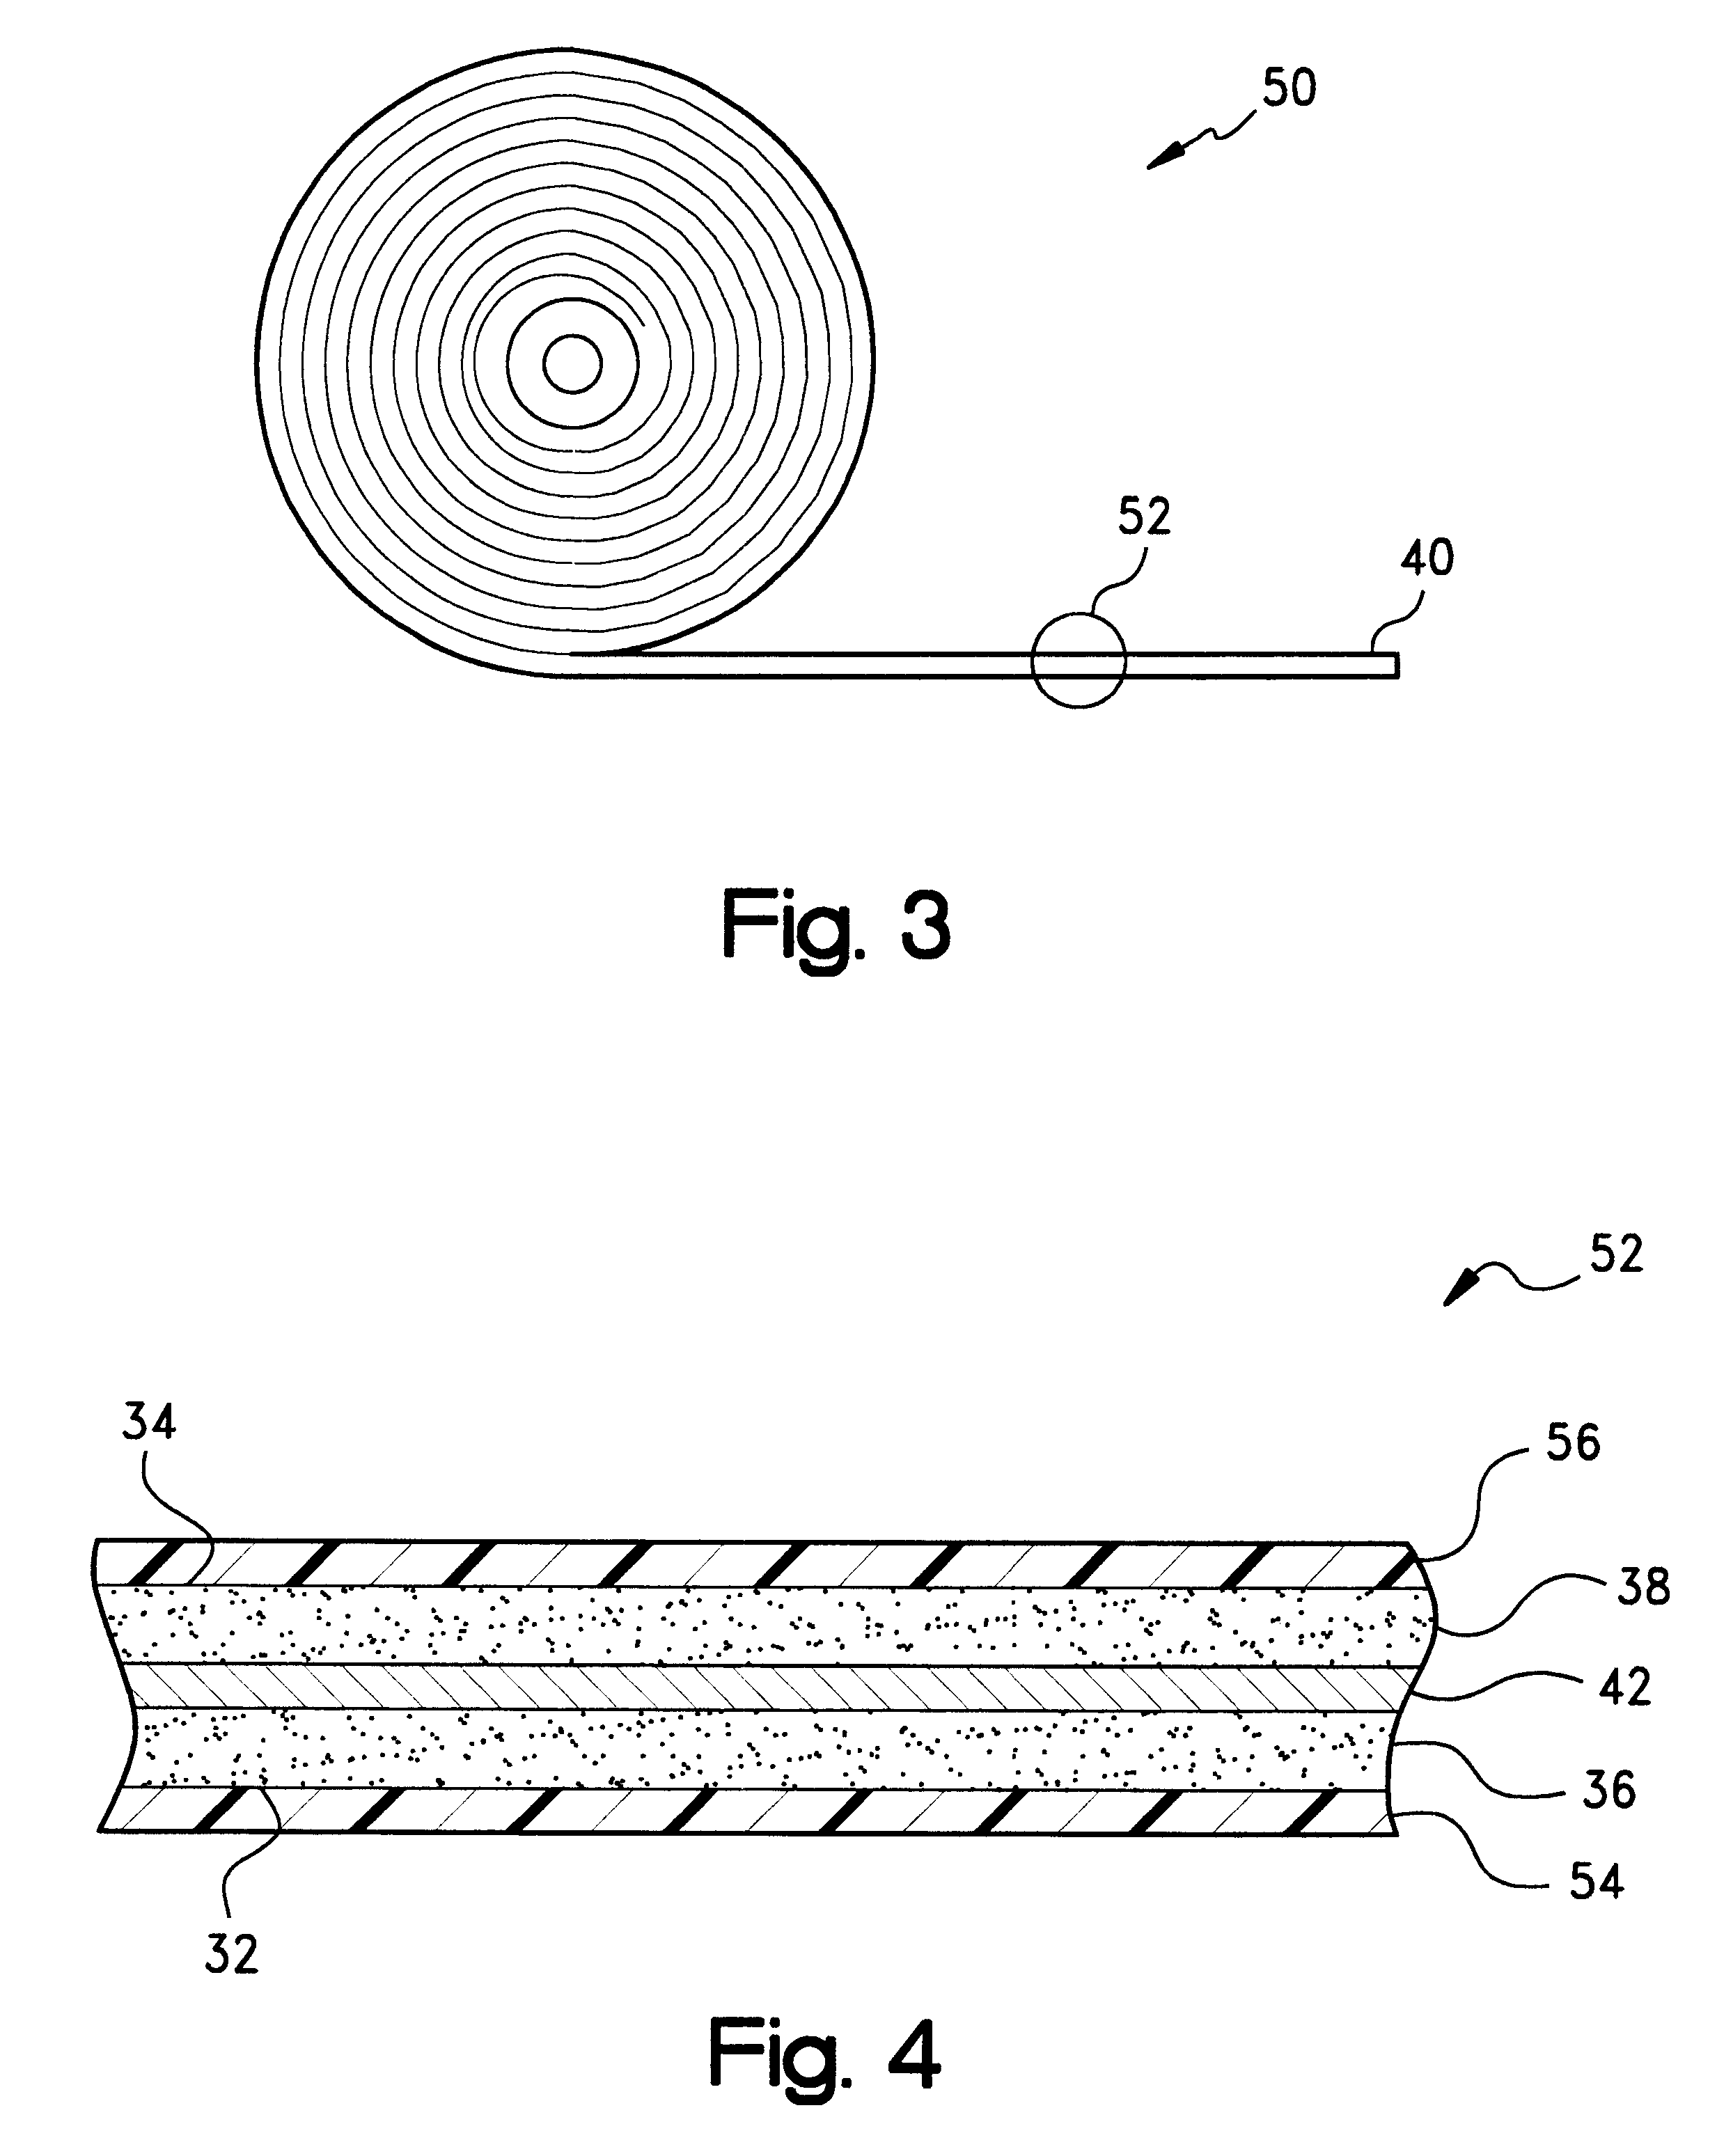 Double-side thermally conductive adhesive tape for plastic-packaged electronic components